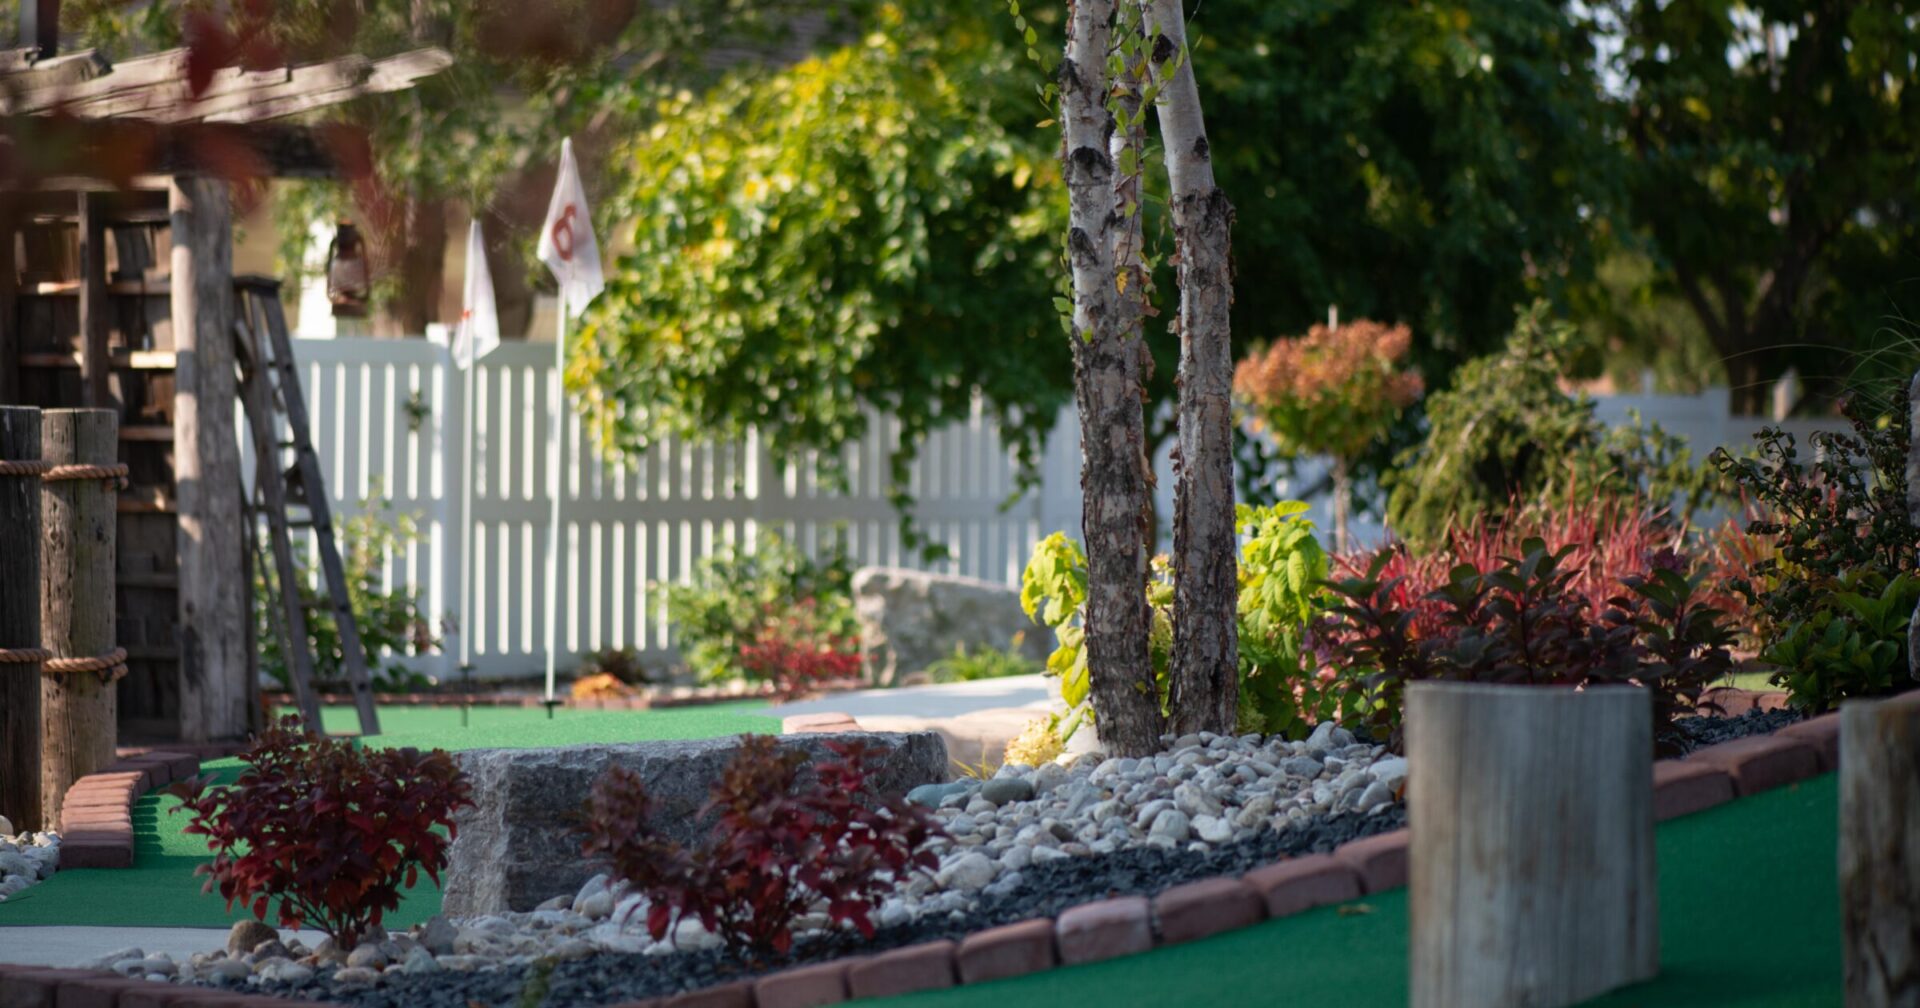 A tranquil mini-golf course with green artificial turf, surrounded by decorative shrubs, birch trees, white fencing, and a rustic wooden structure.